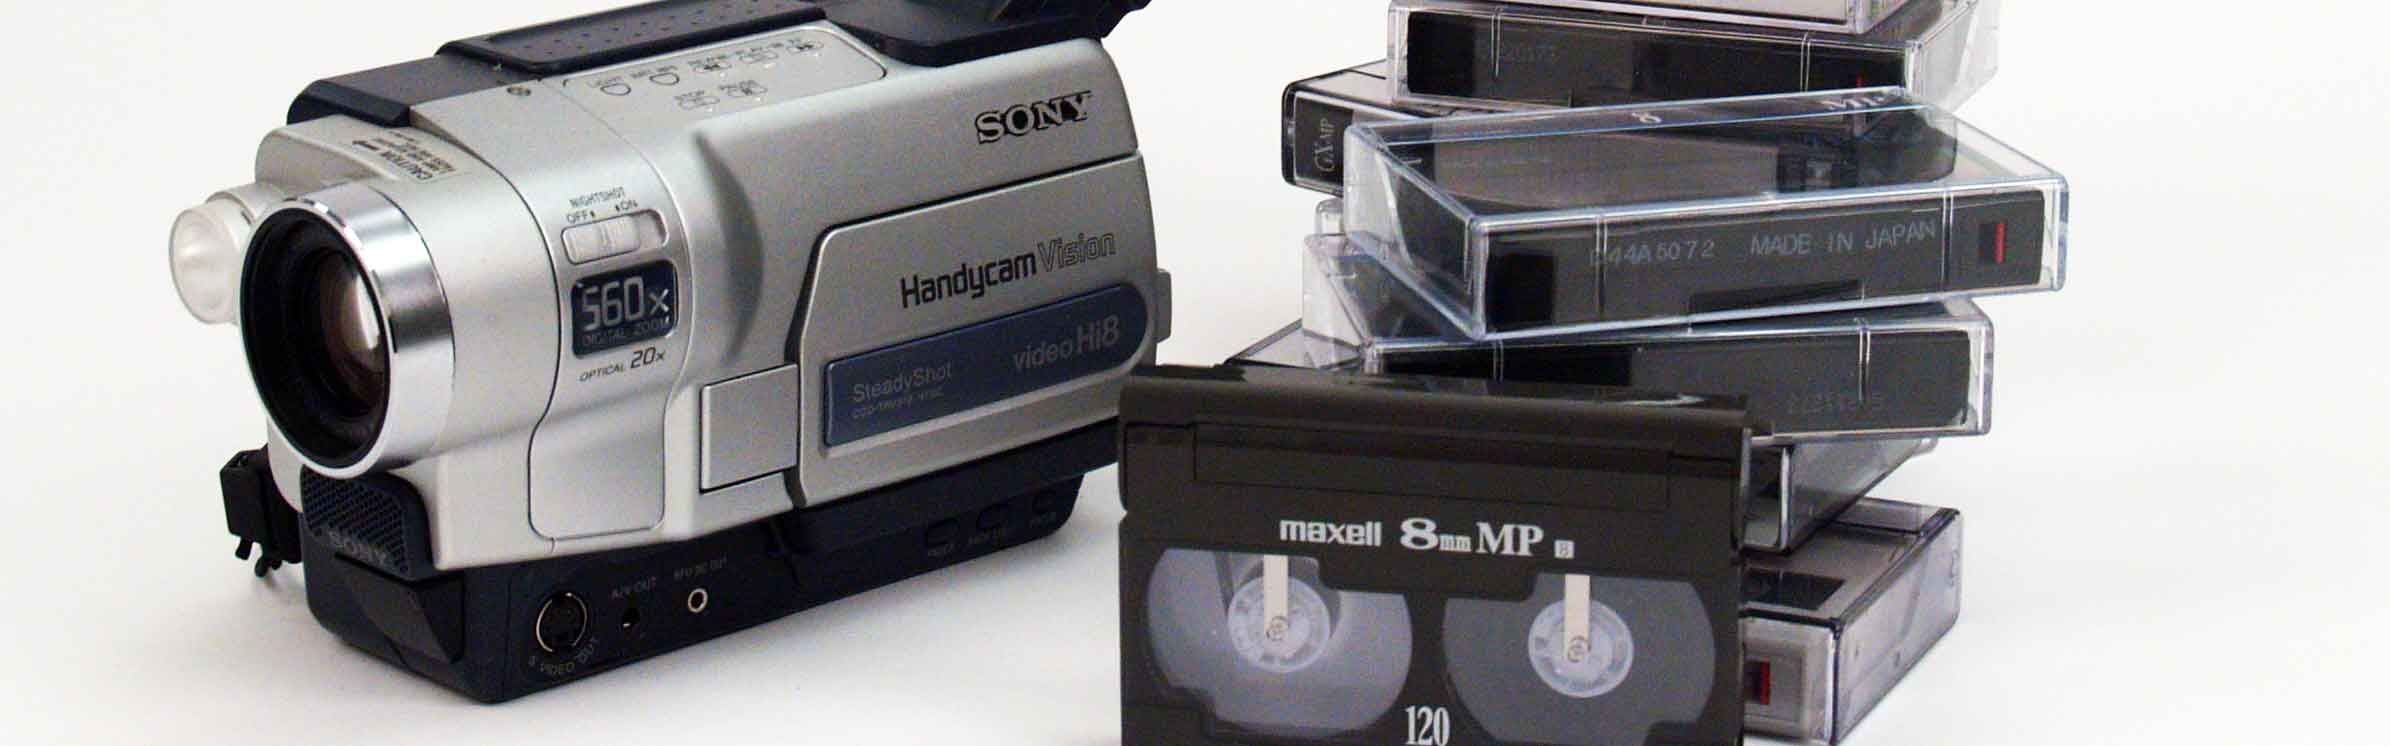 How to Watch Hi8 Tapes: With or Without the Camcorder – Nostalgic